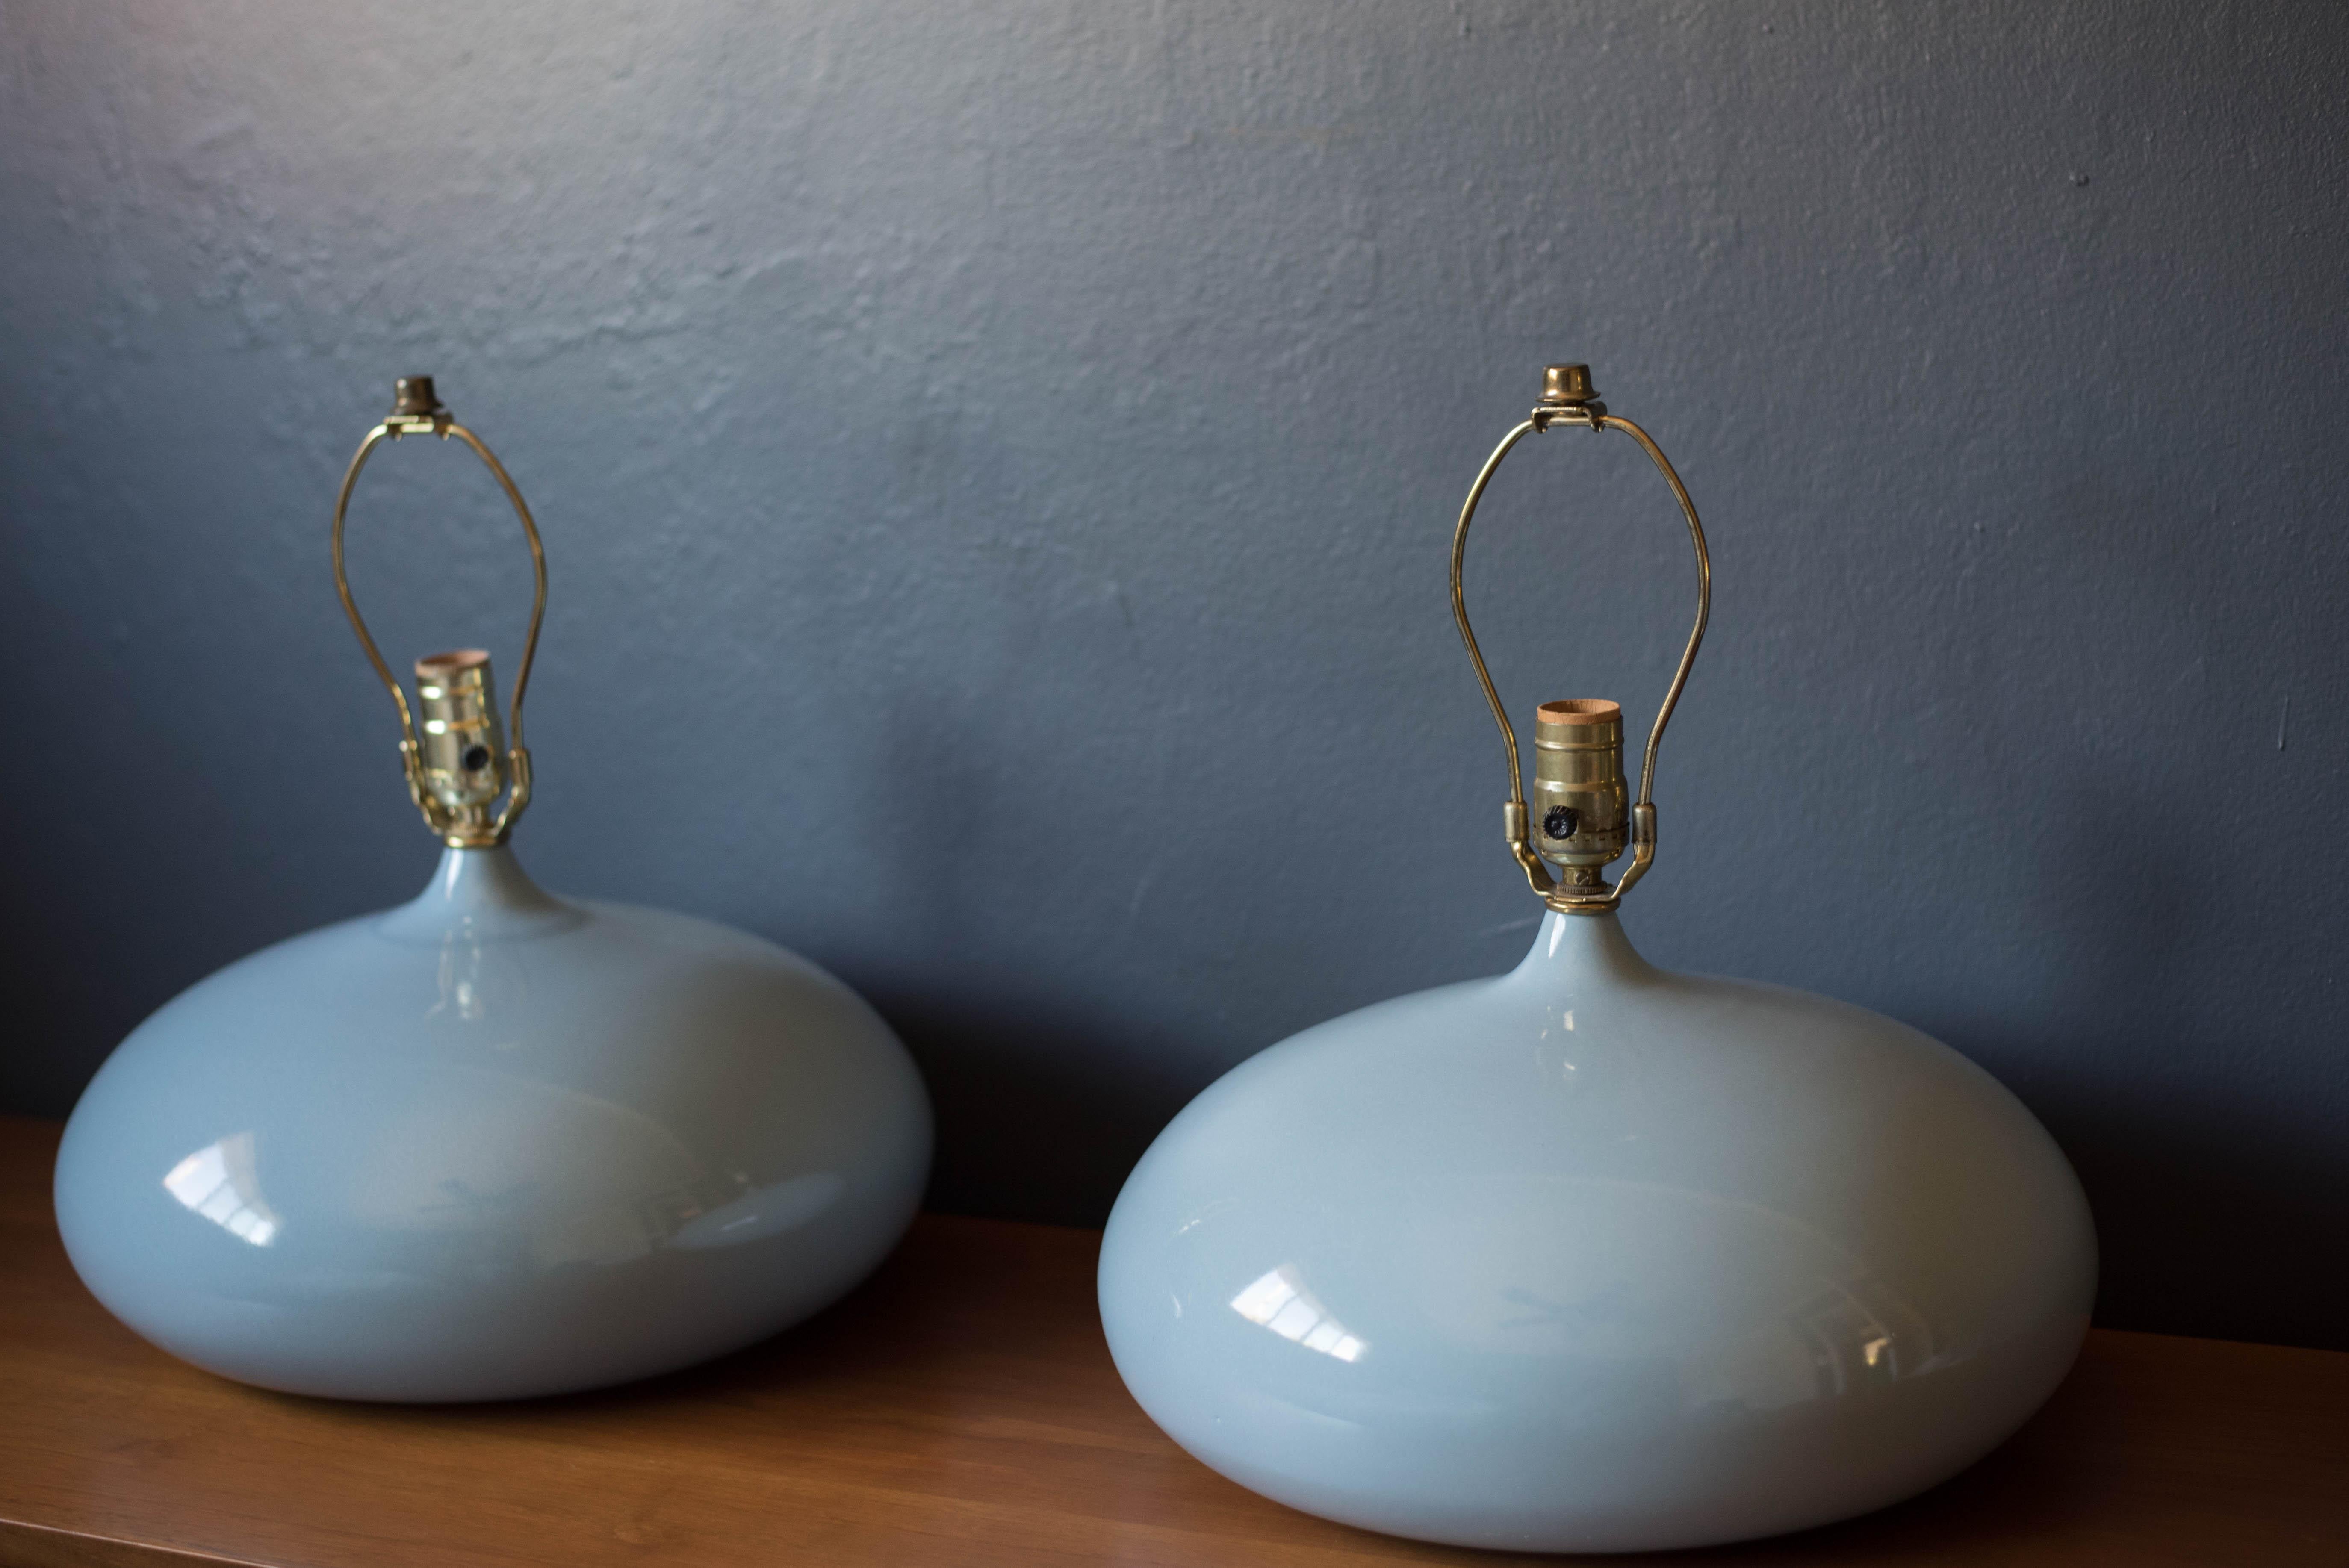 Pair of Sculptural Mid-Century Modern Round Gray Ceramic Table Lamps In Good Condition For Sale In San Jose, CA